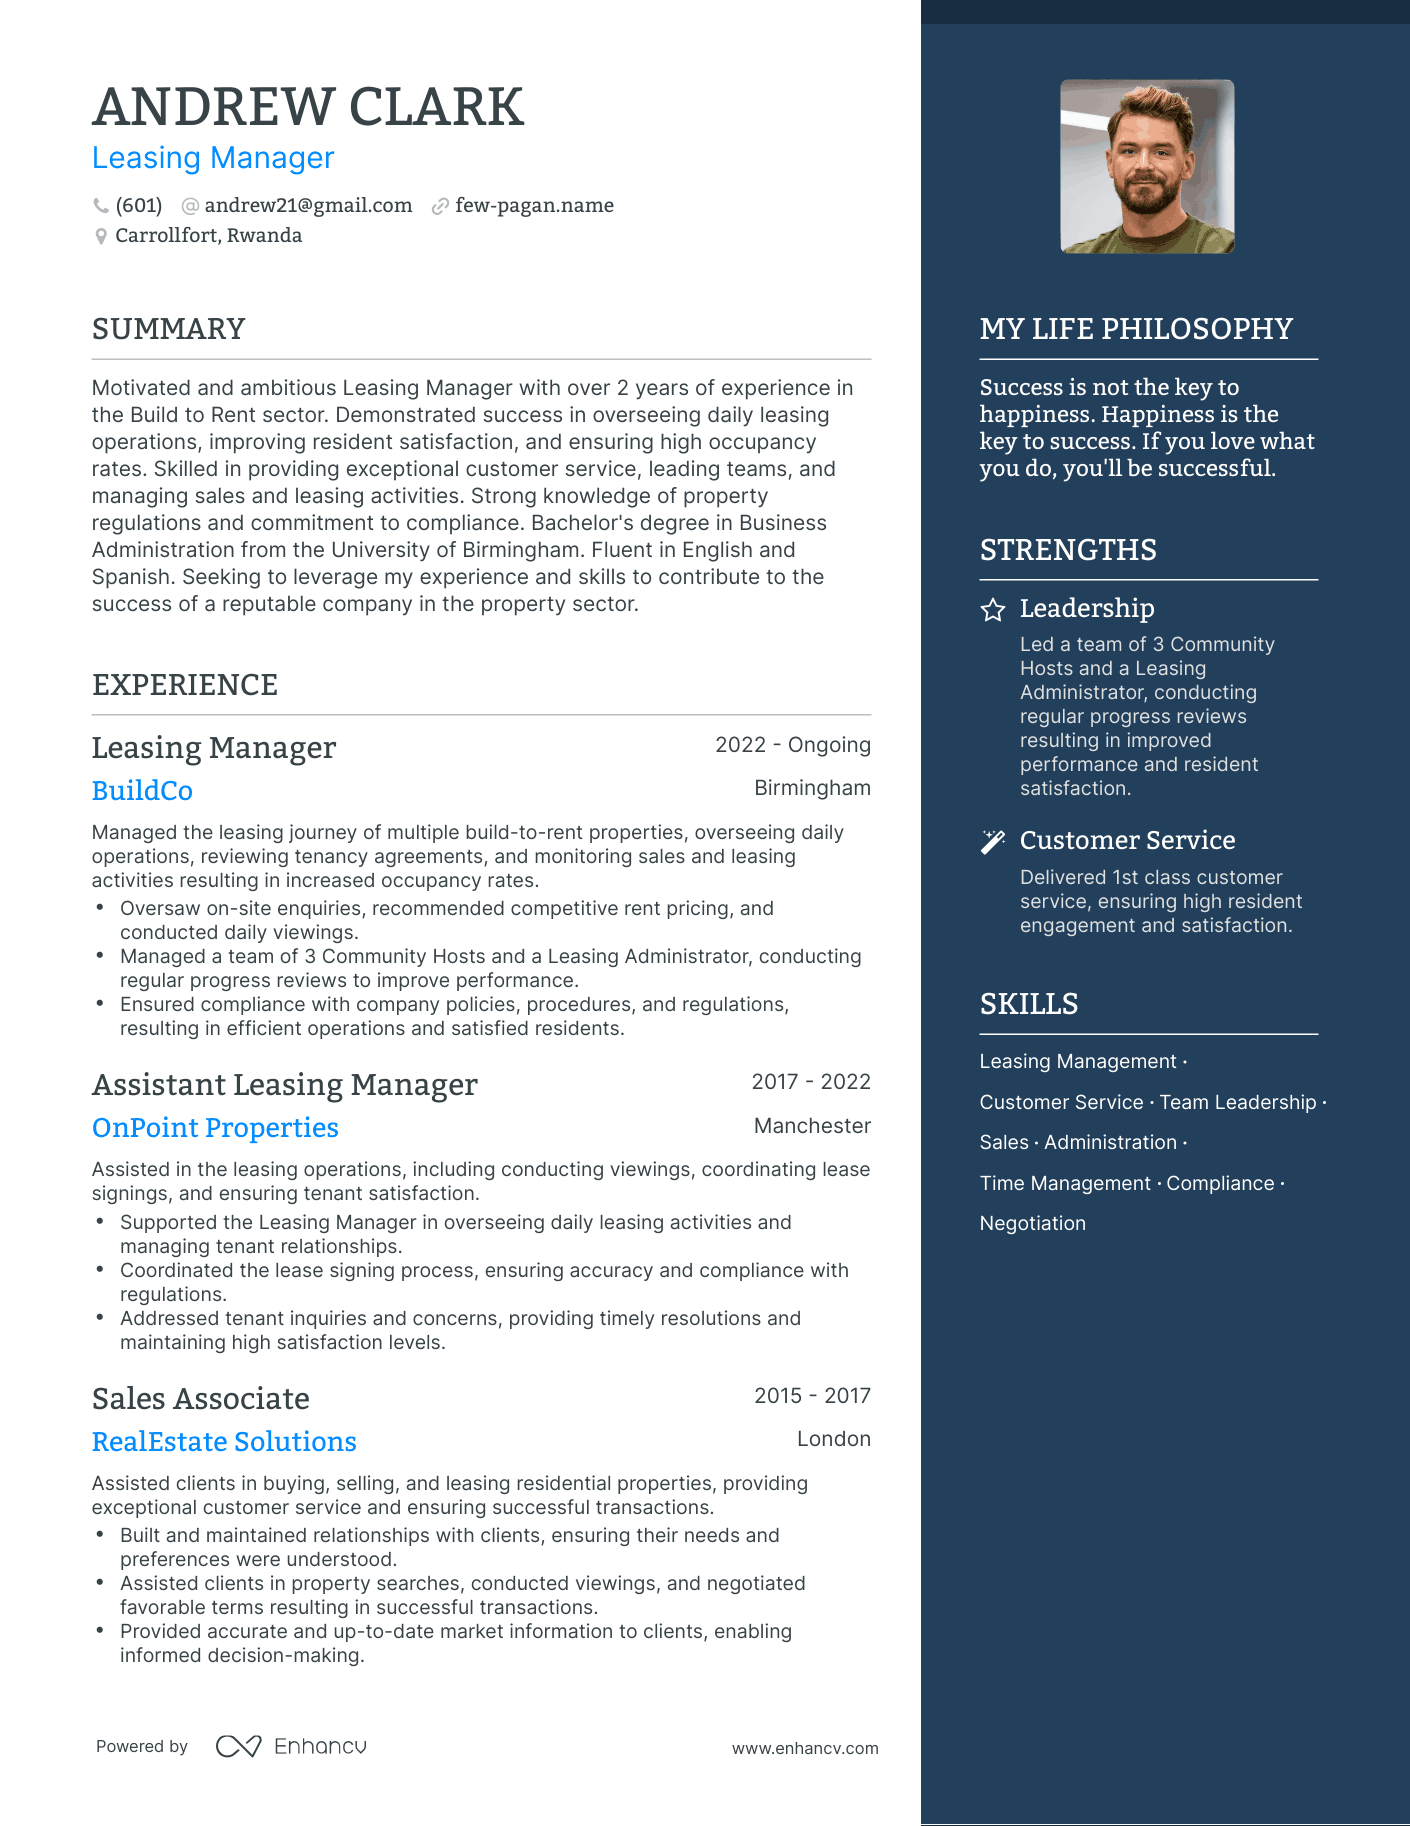 Leasing Manager resume example